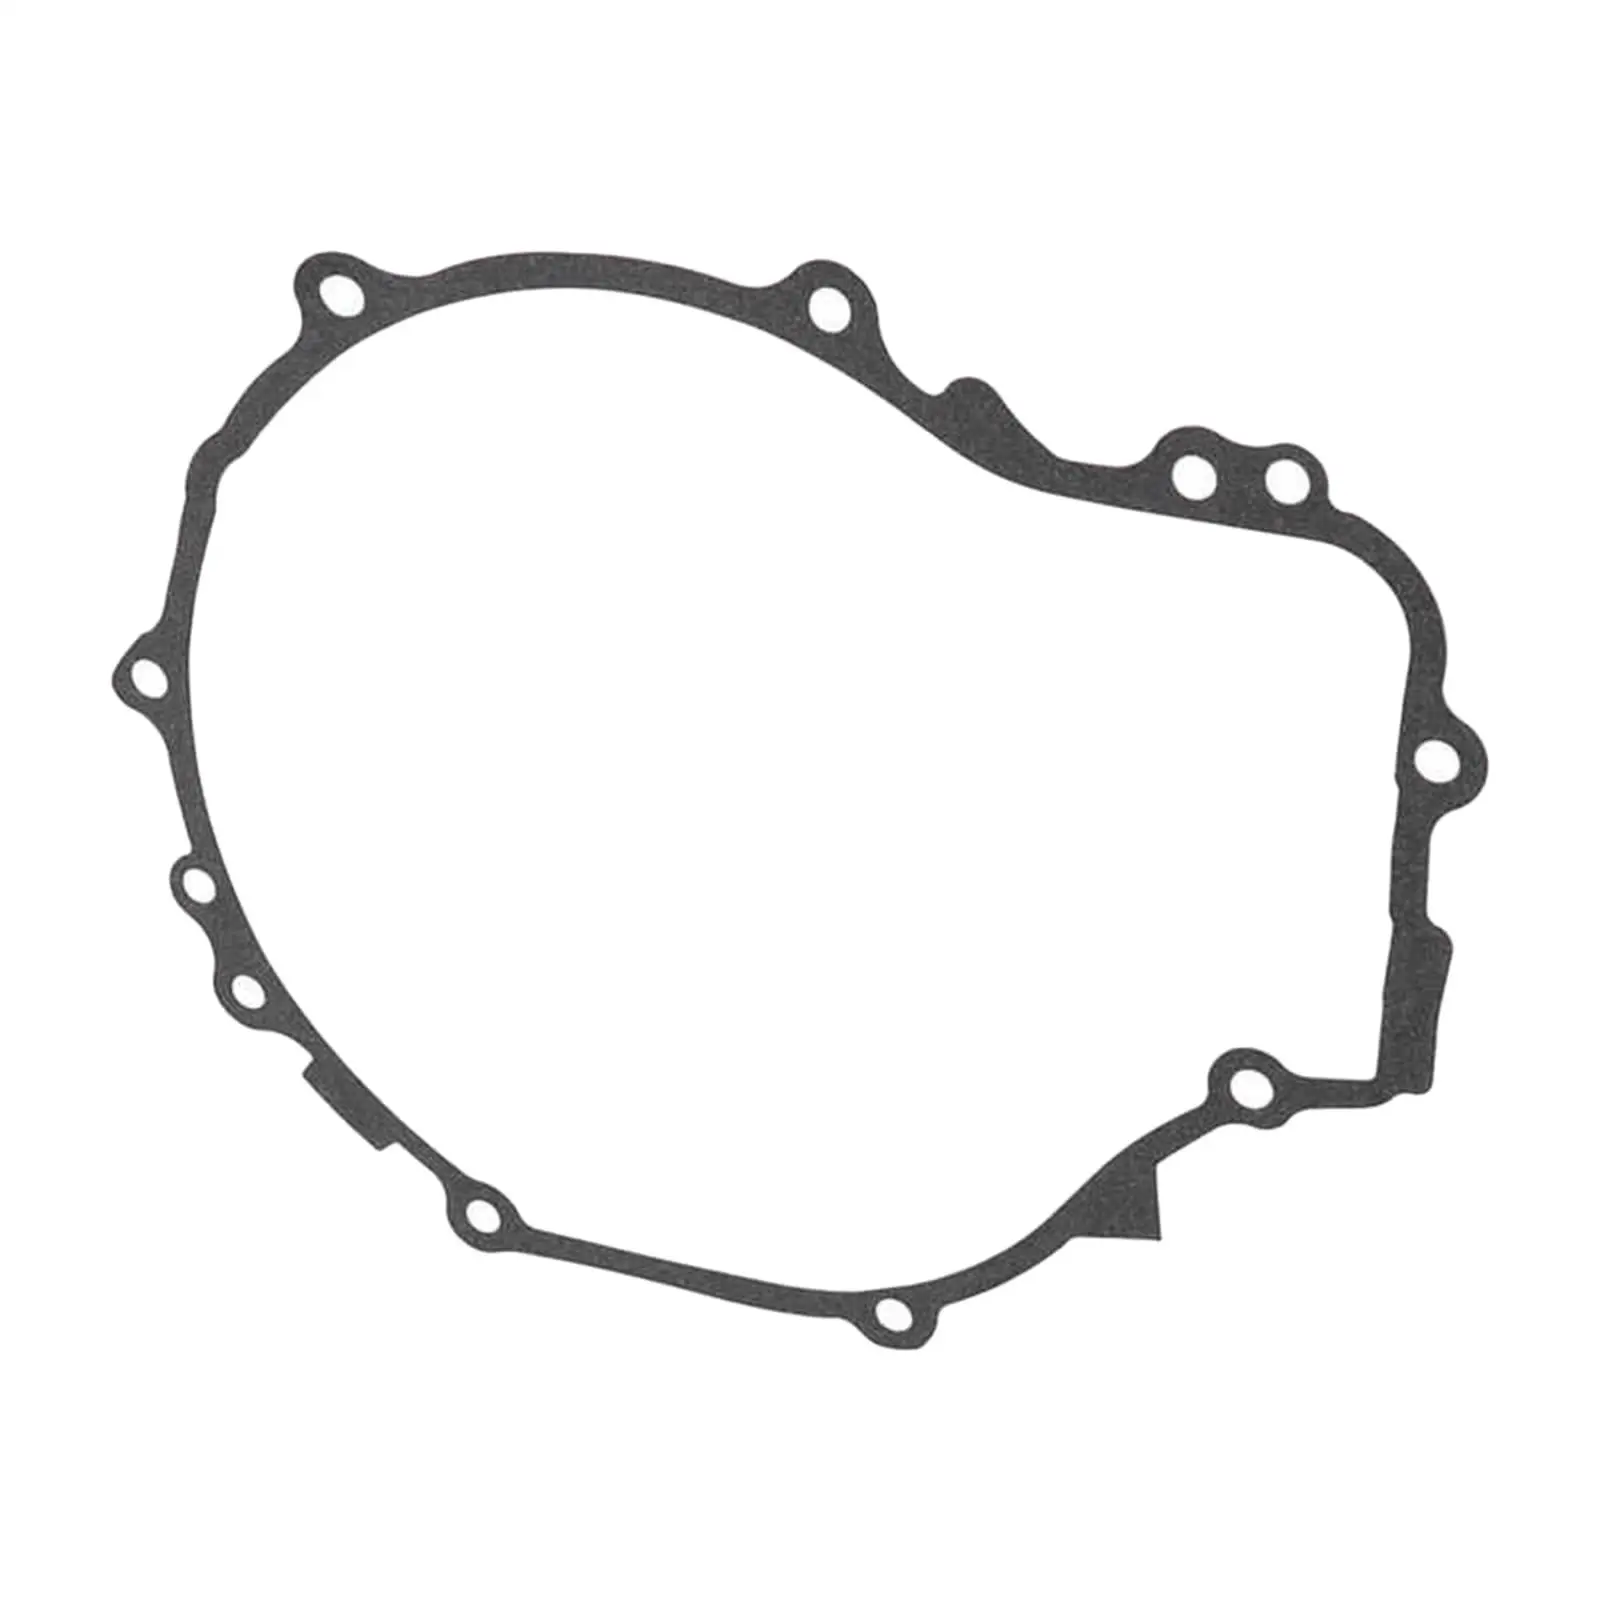 Vehicle Pull Start Gasket/ 3084933 for 500 Accessories High Quality/